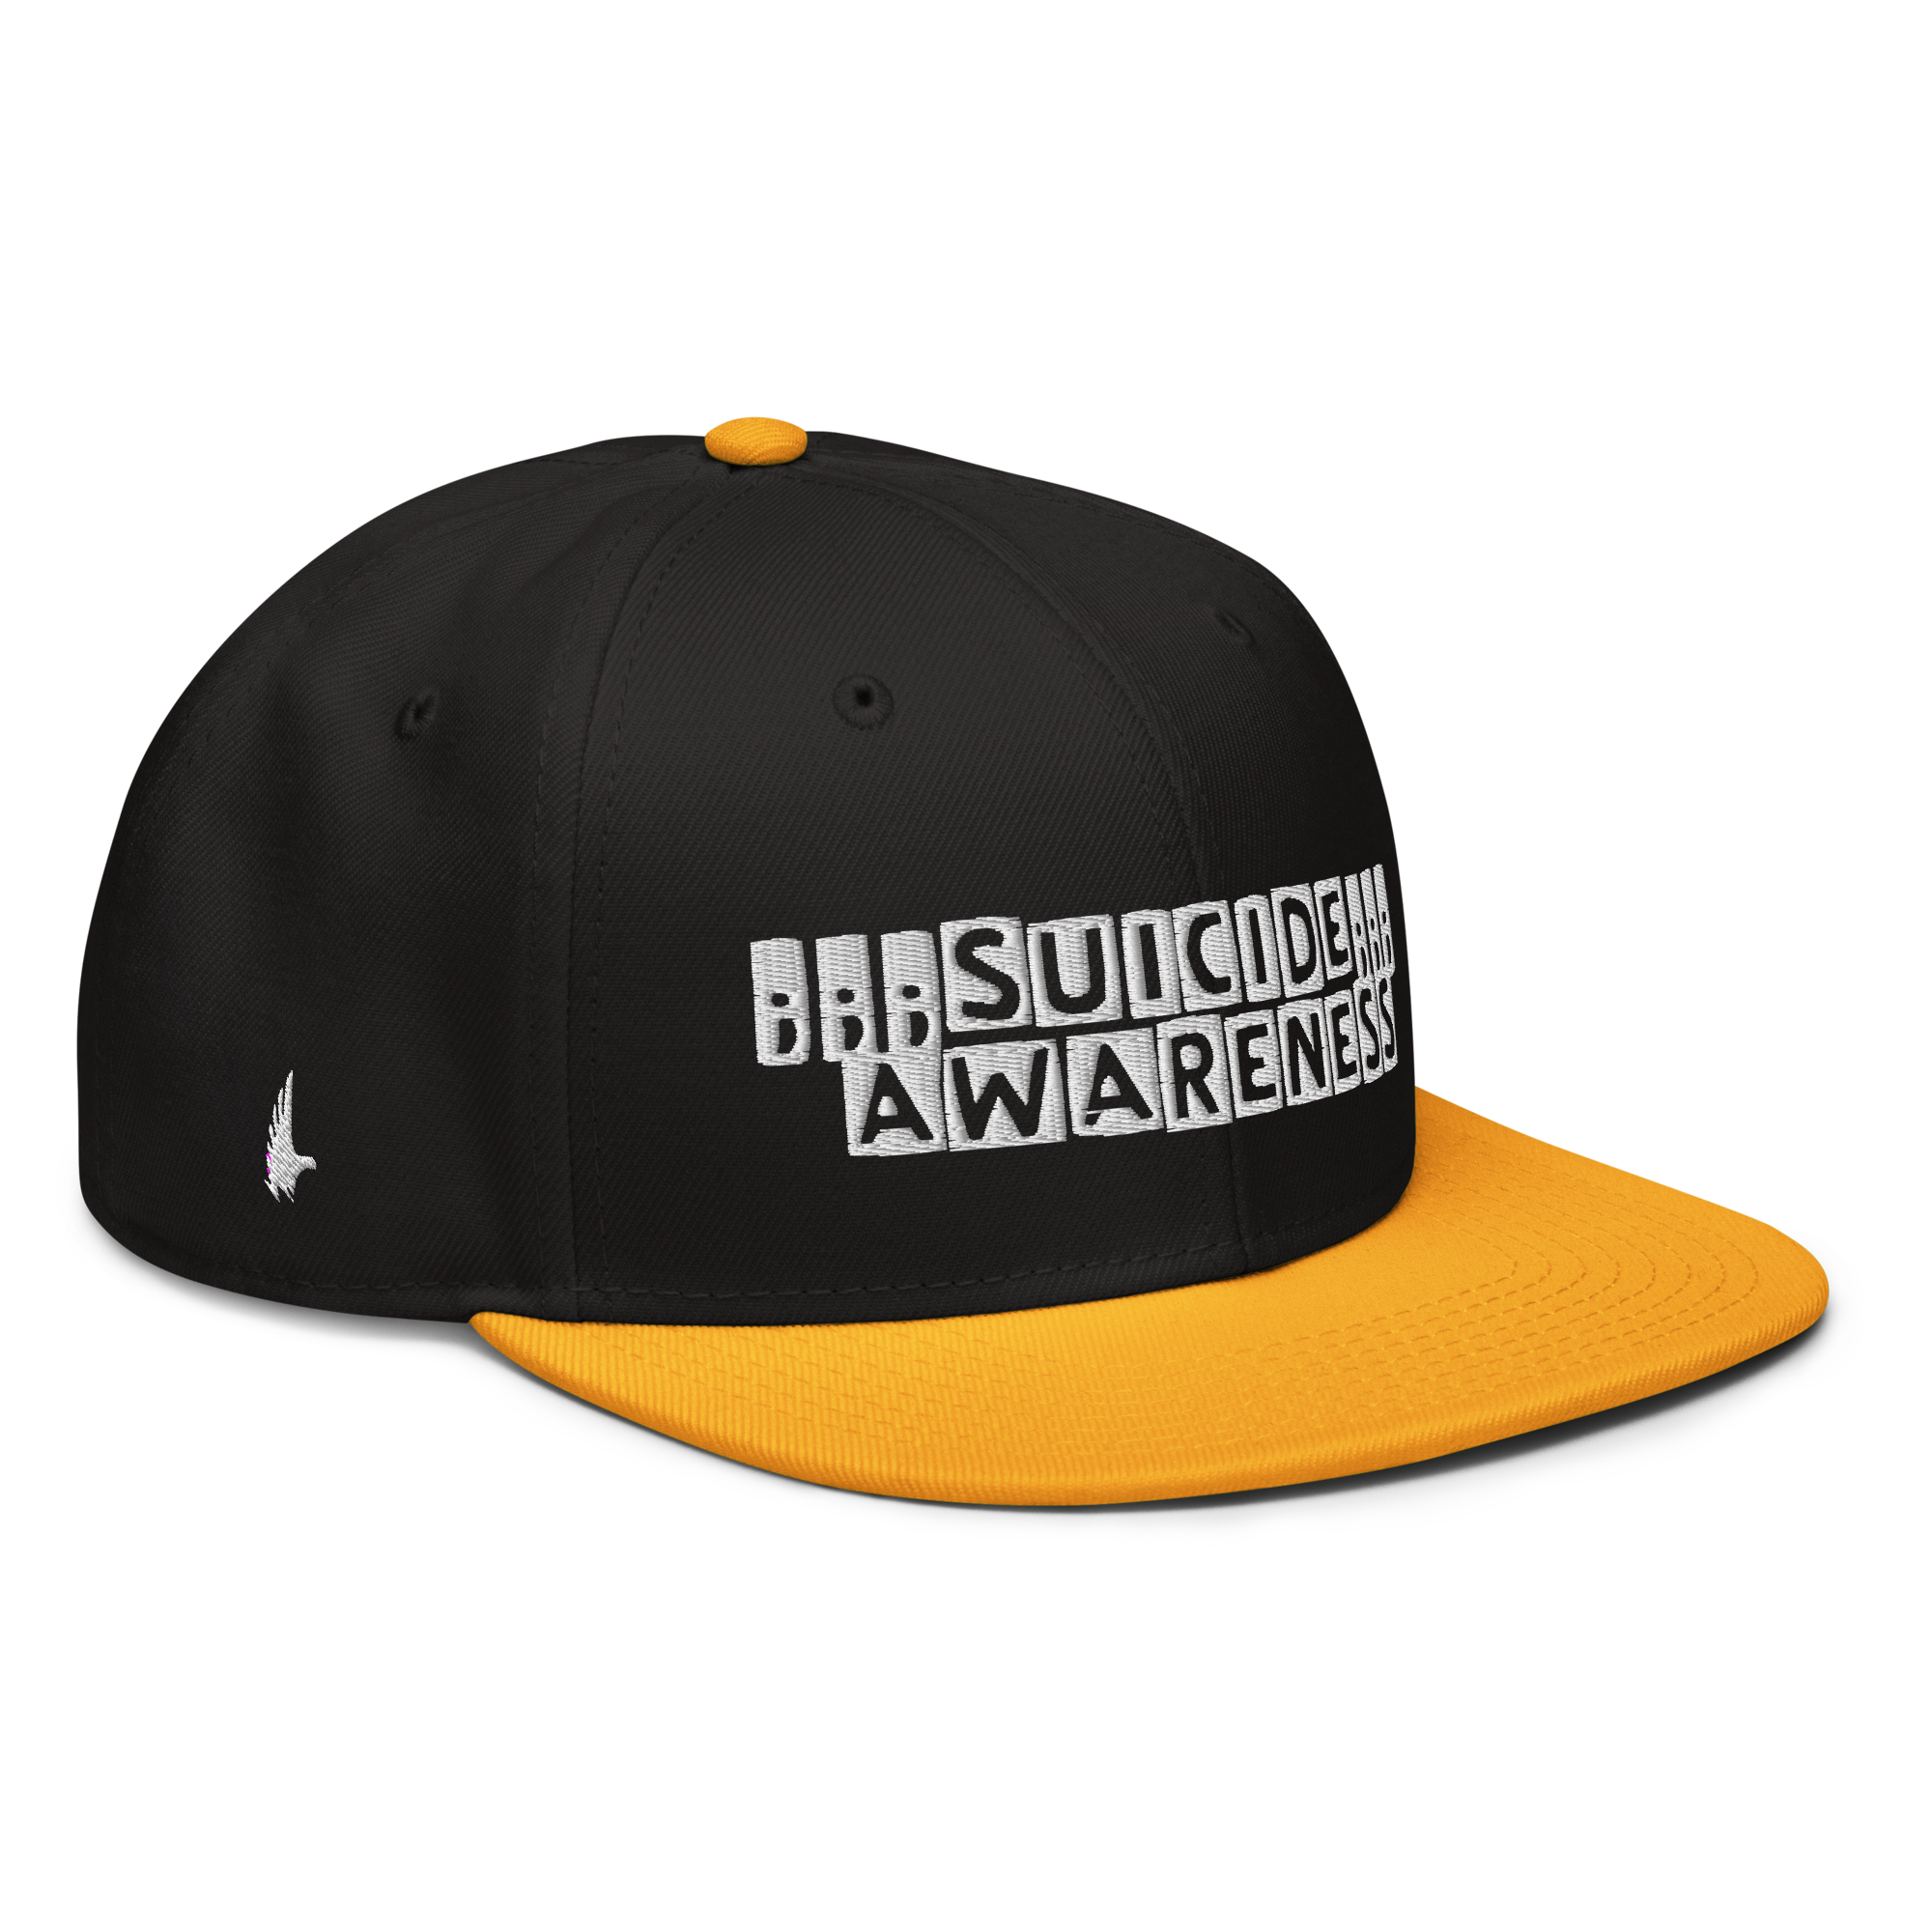 Suicide Awareness Snapback Hat - Black / White / Gold OS - Loyalty Vibes